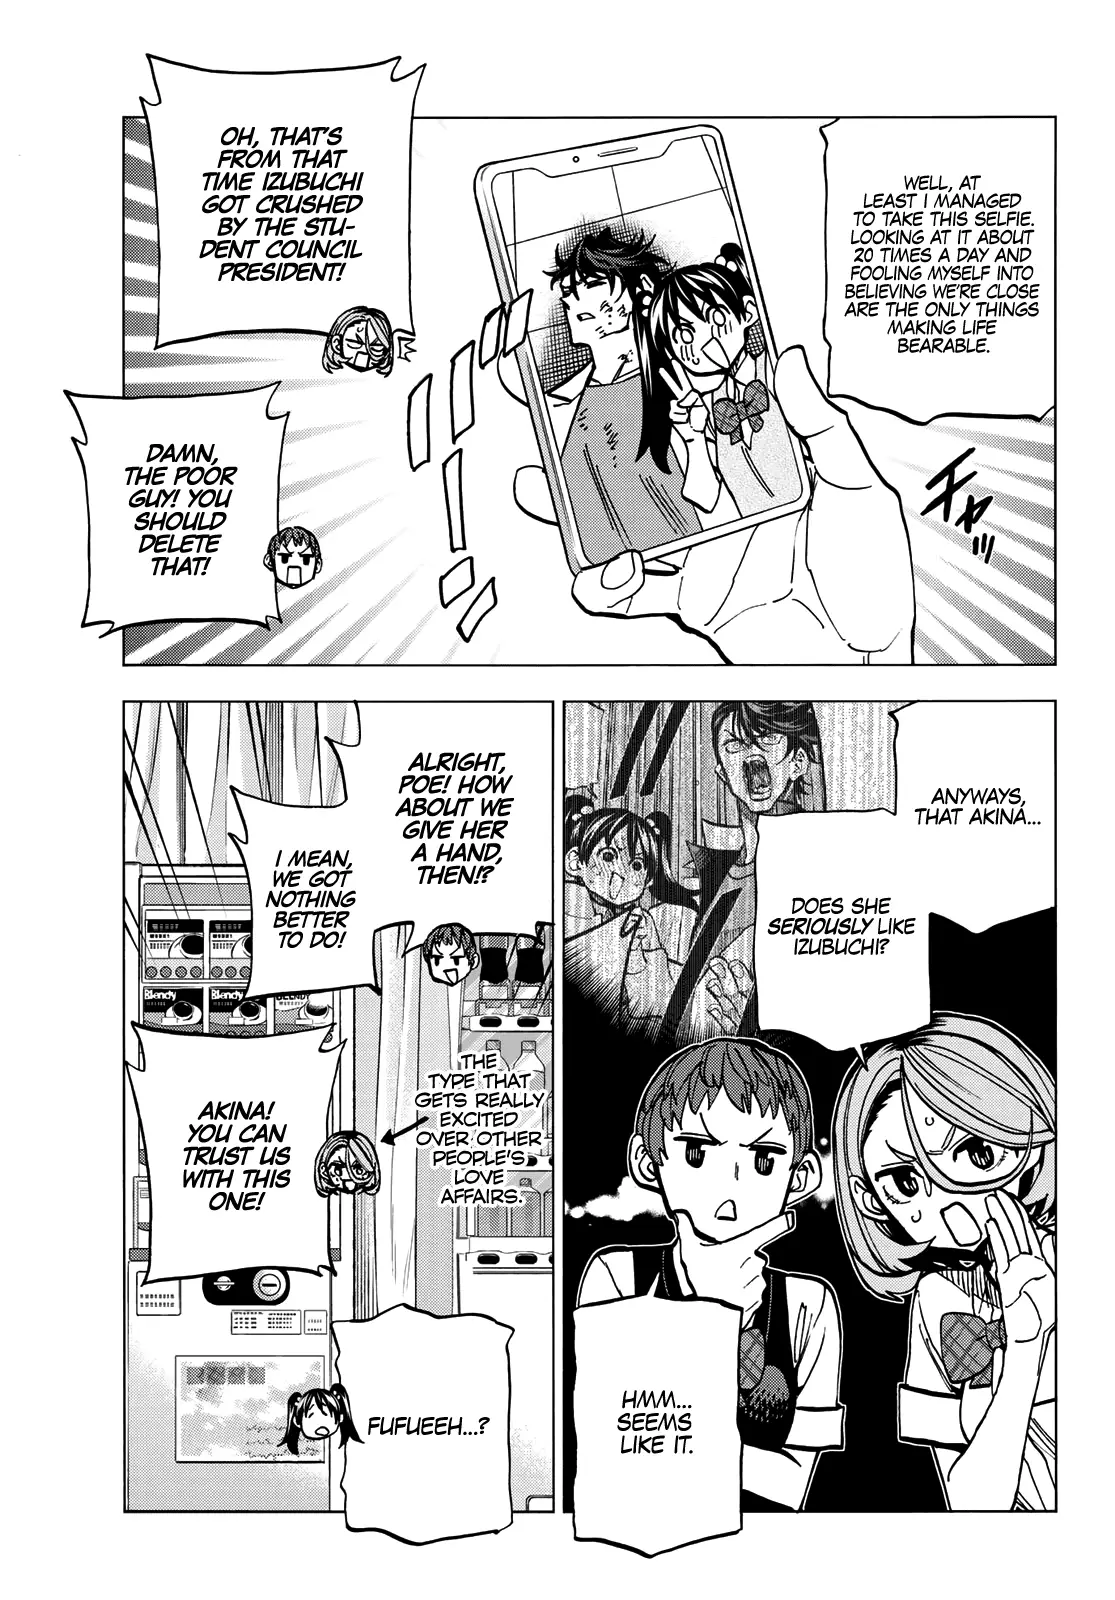 The Story Between A Dumb Prefect And A High School Girl With An Inappropriate Skirt Length - 10 page 4